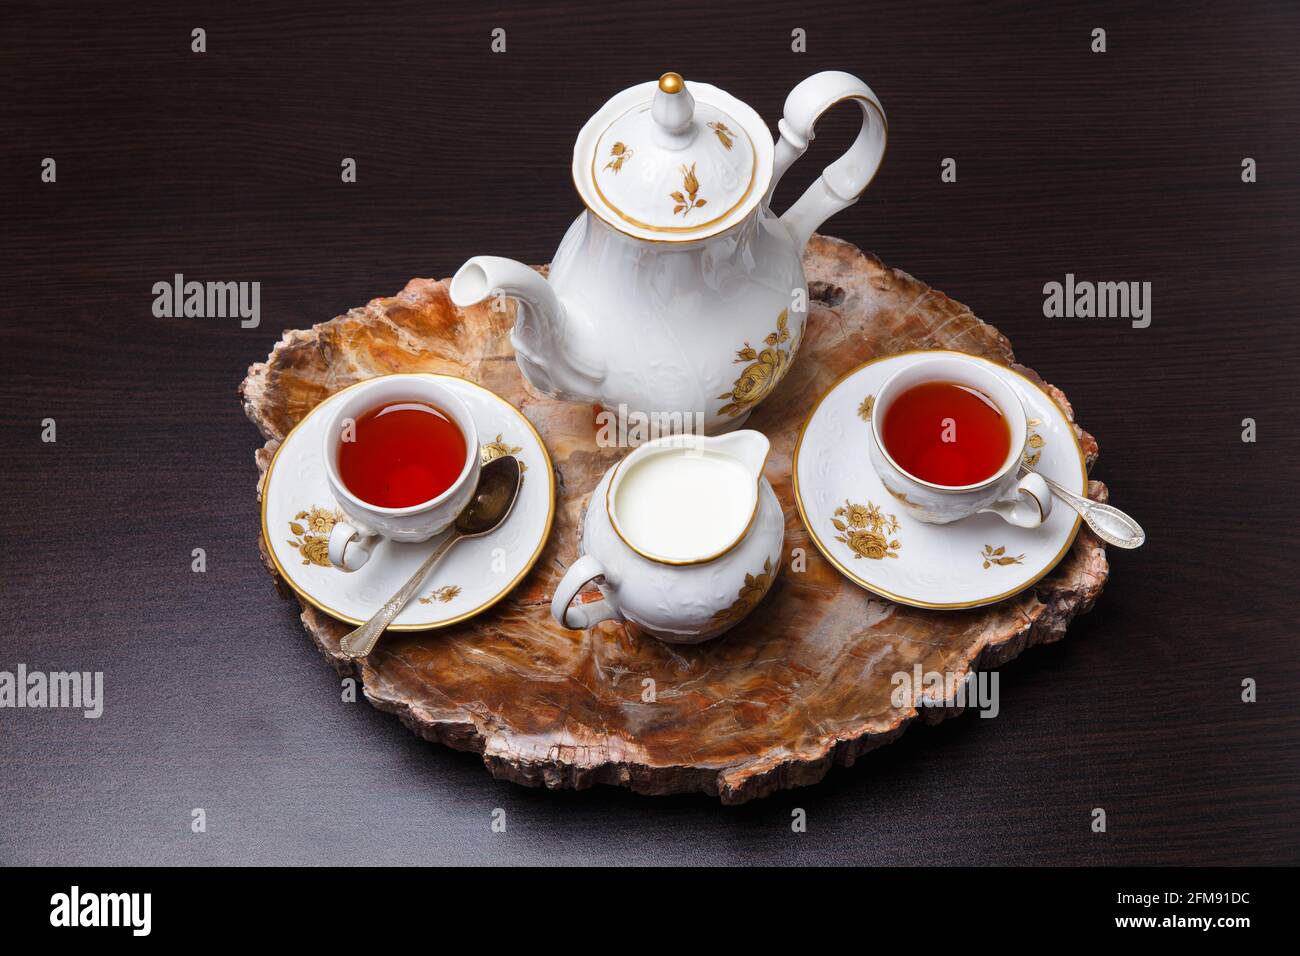 Elegant coffee set on an exclusive tray made from a cut of ancient petrified wood Stock Photo